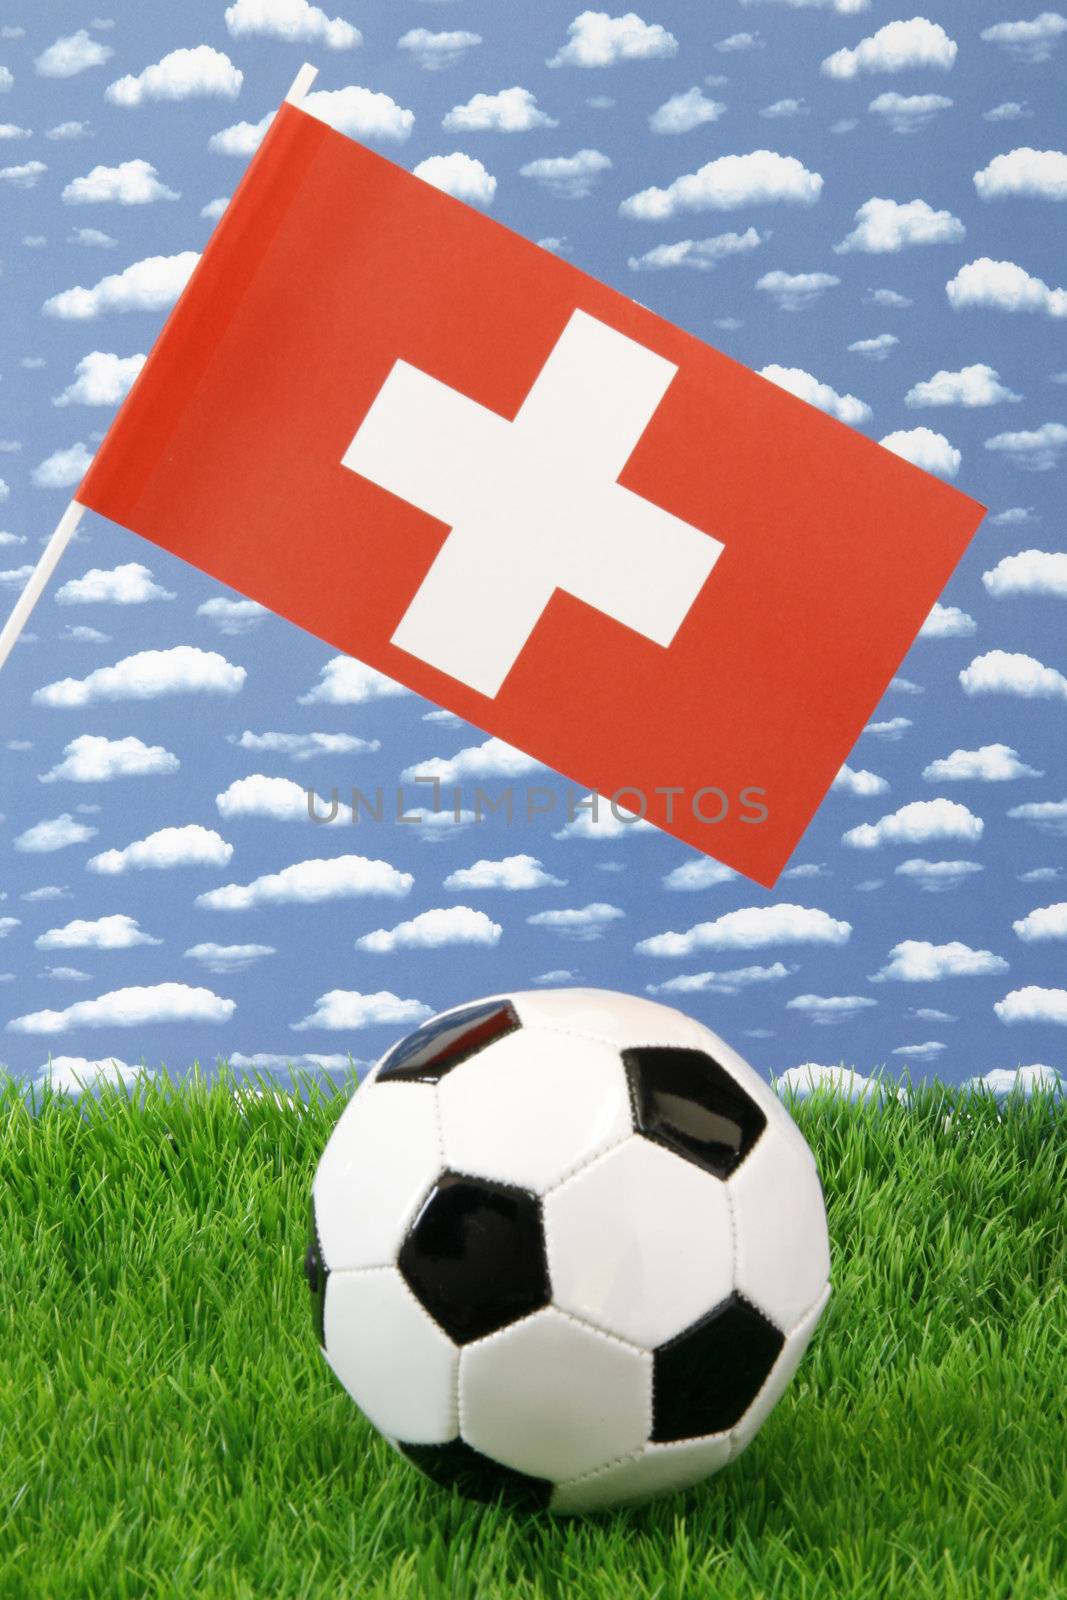 Soccerball on grass with swiss national flag over sky background